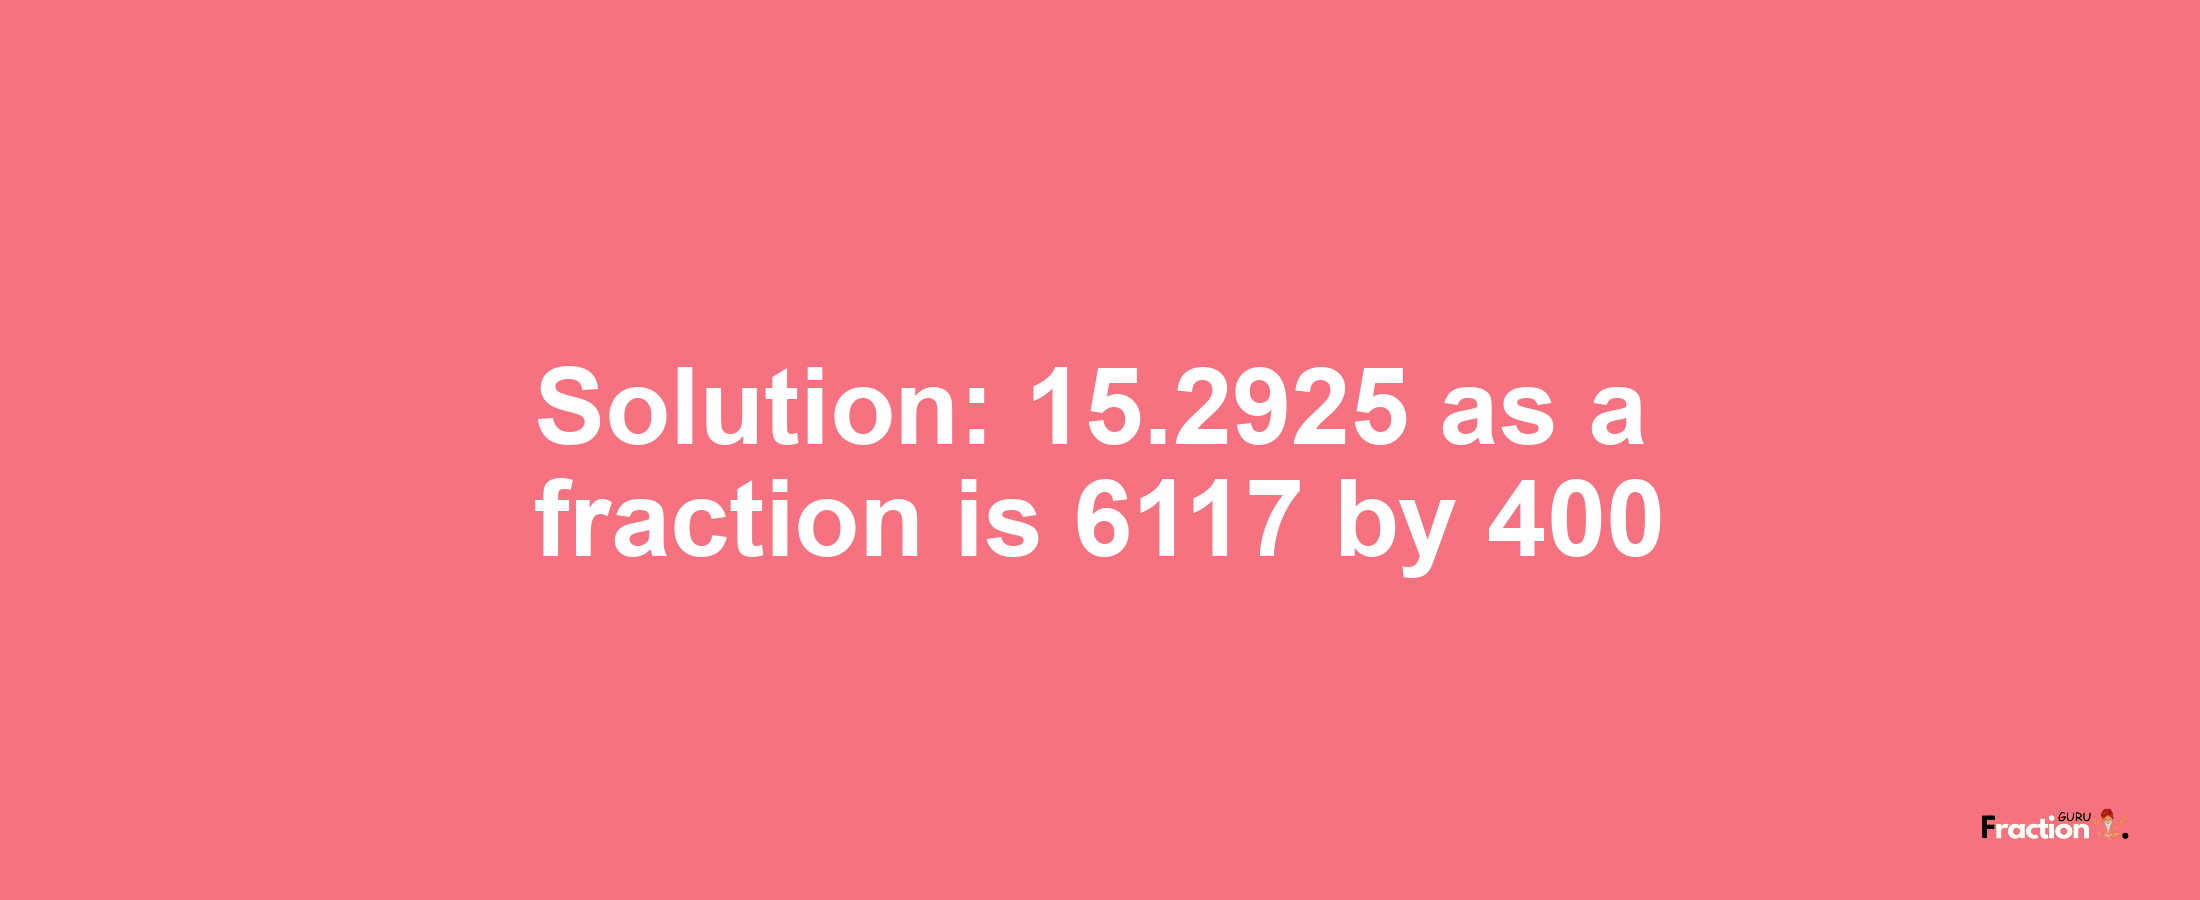 Solution:15.2925 as a fraction is 6117/400